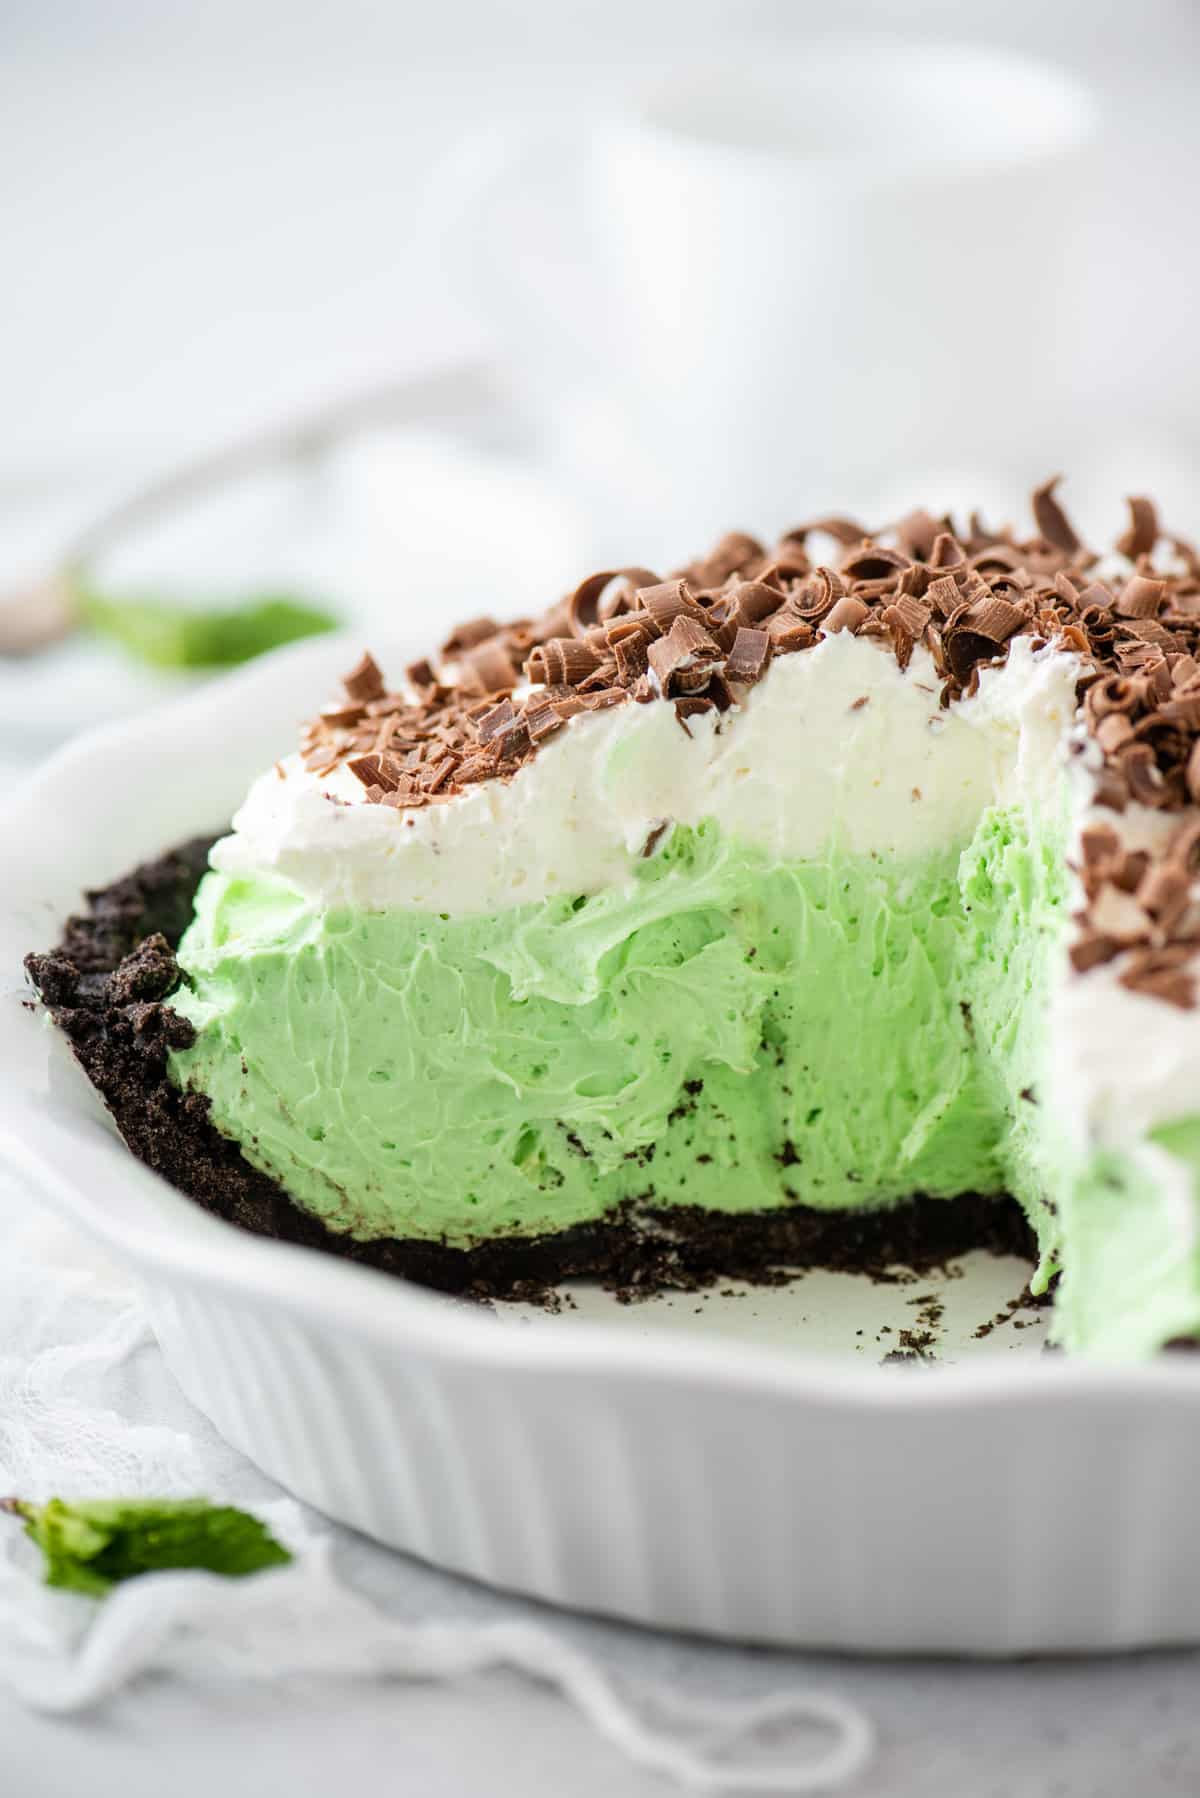 whipped cream on top of a green pie with chocolate shavings on top